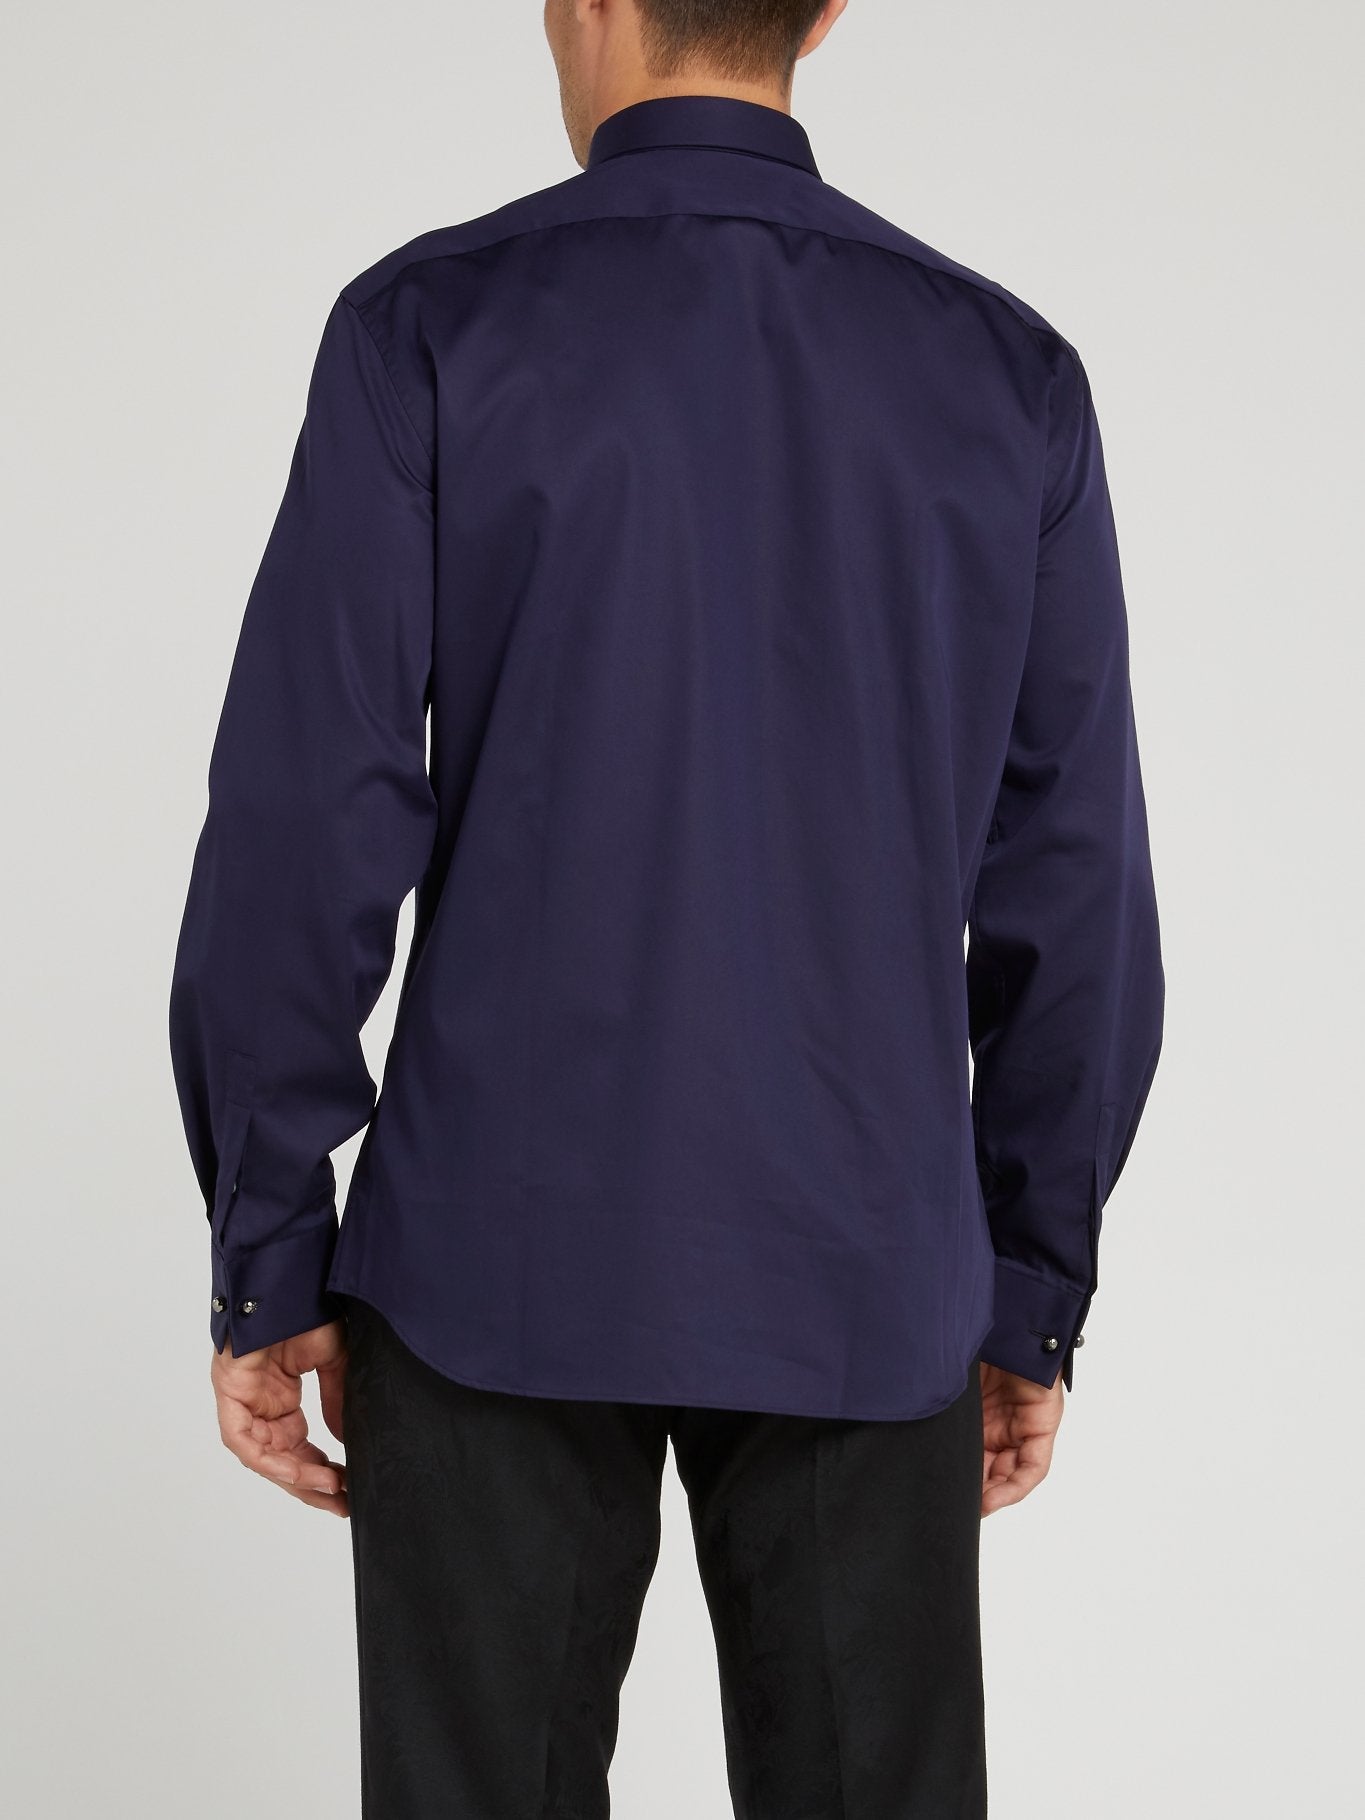 Navy with Black Panel Long Sleeve Shirt